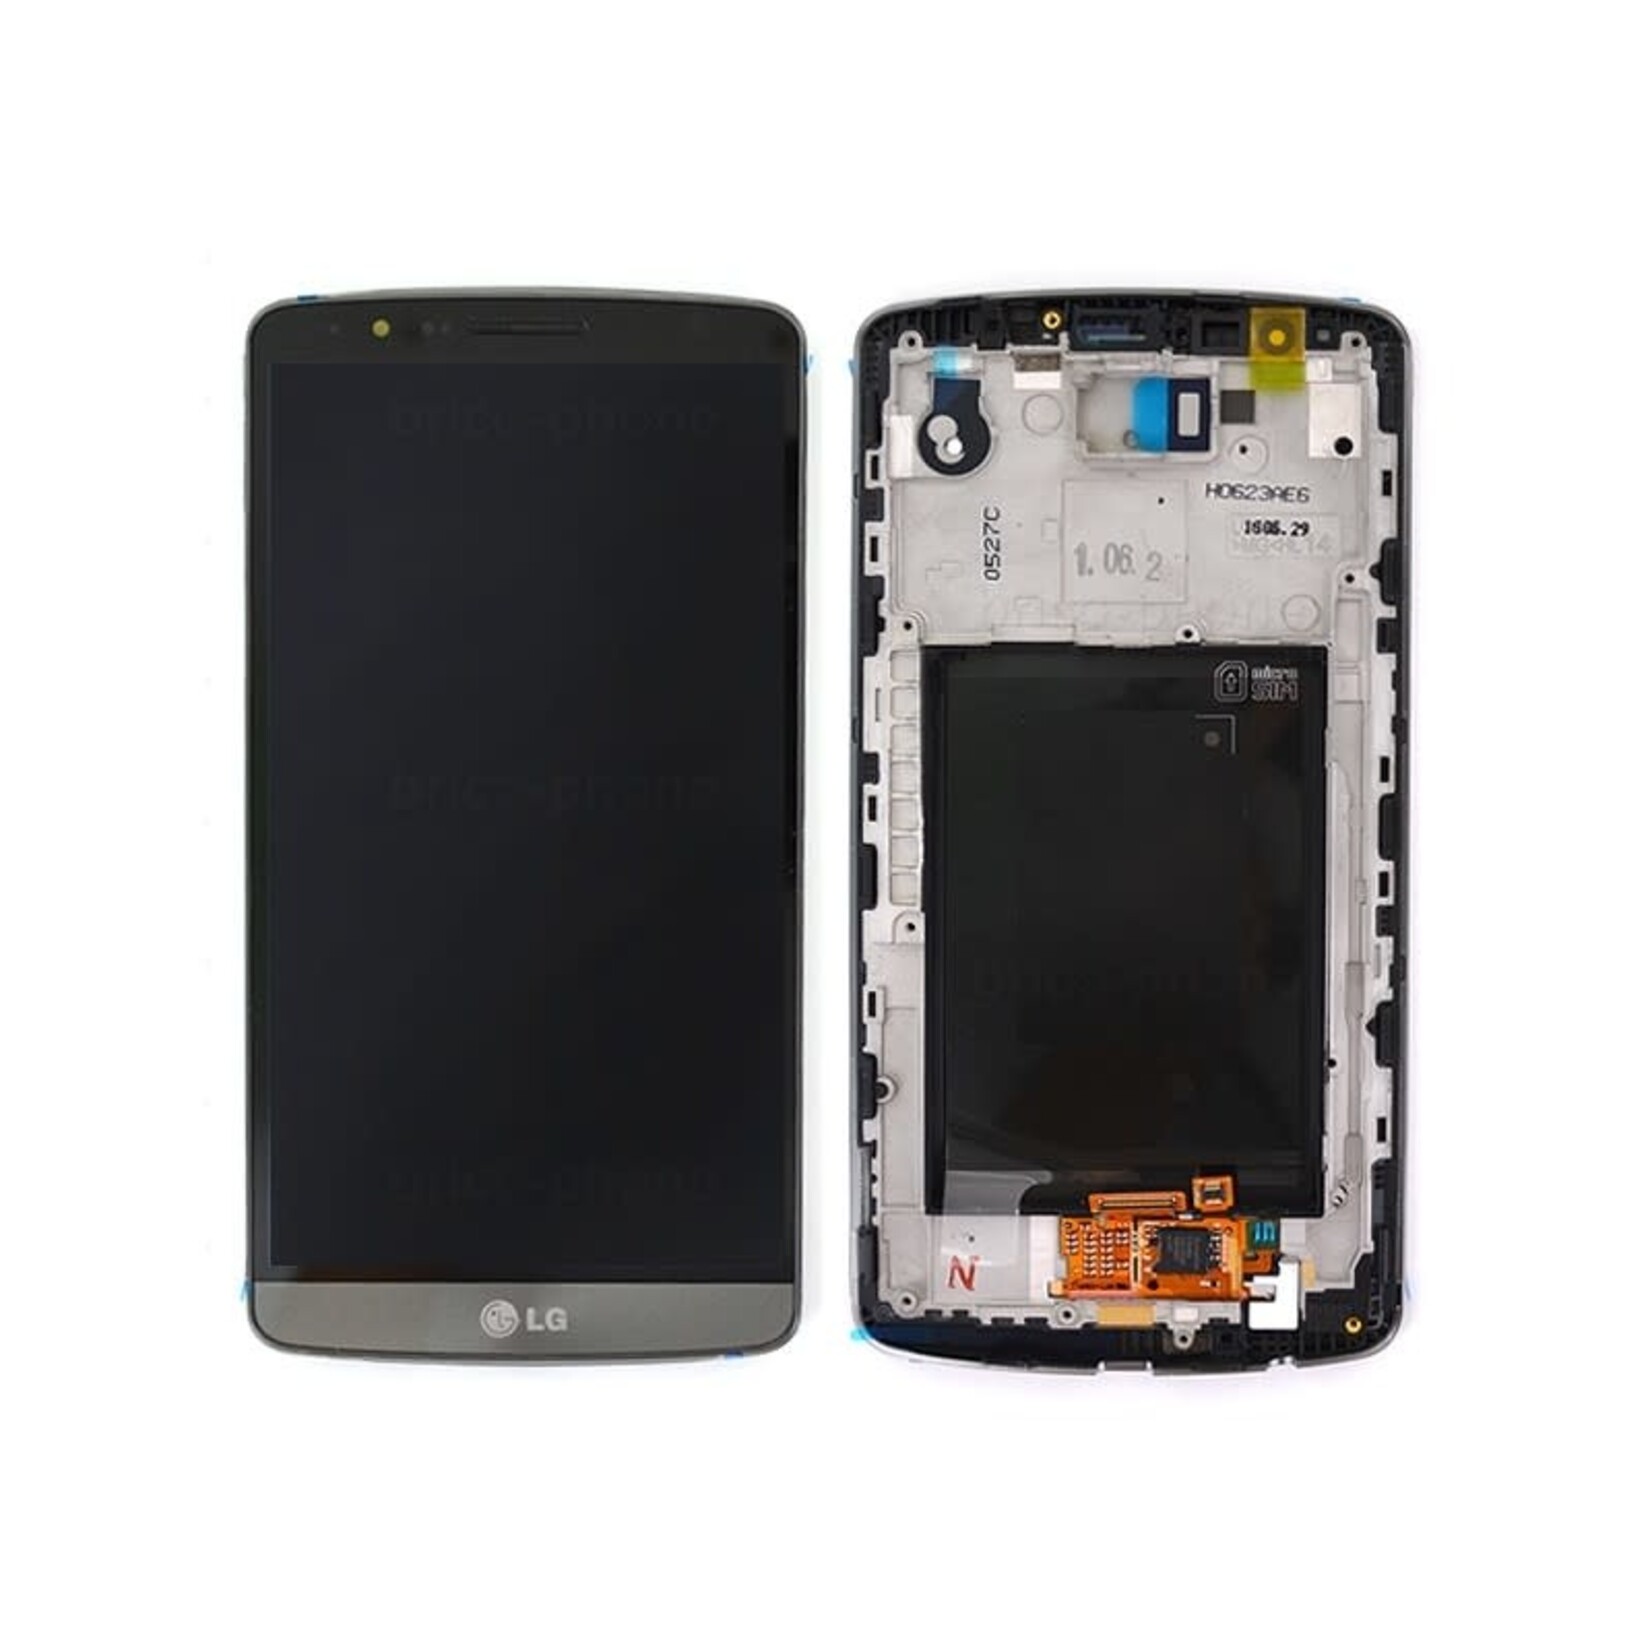 LG LCD DIGITIZER ASSEMBLY WITH FRAME LG G3